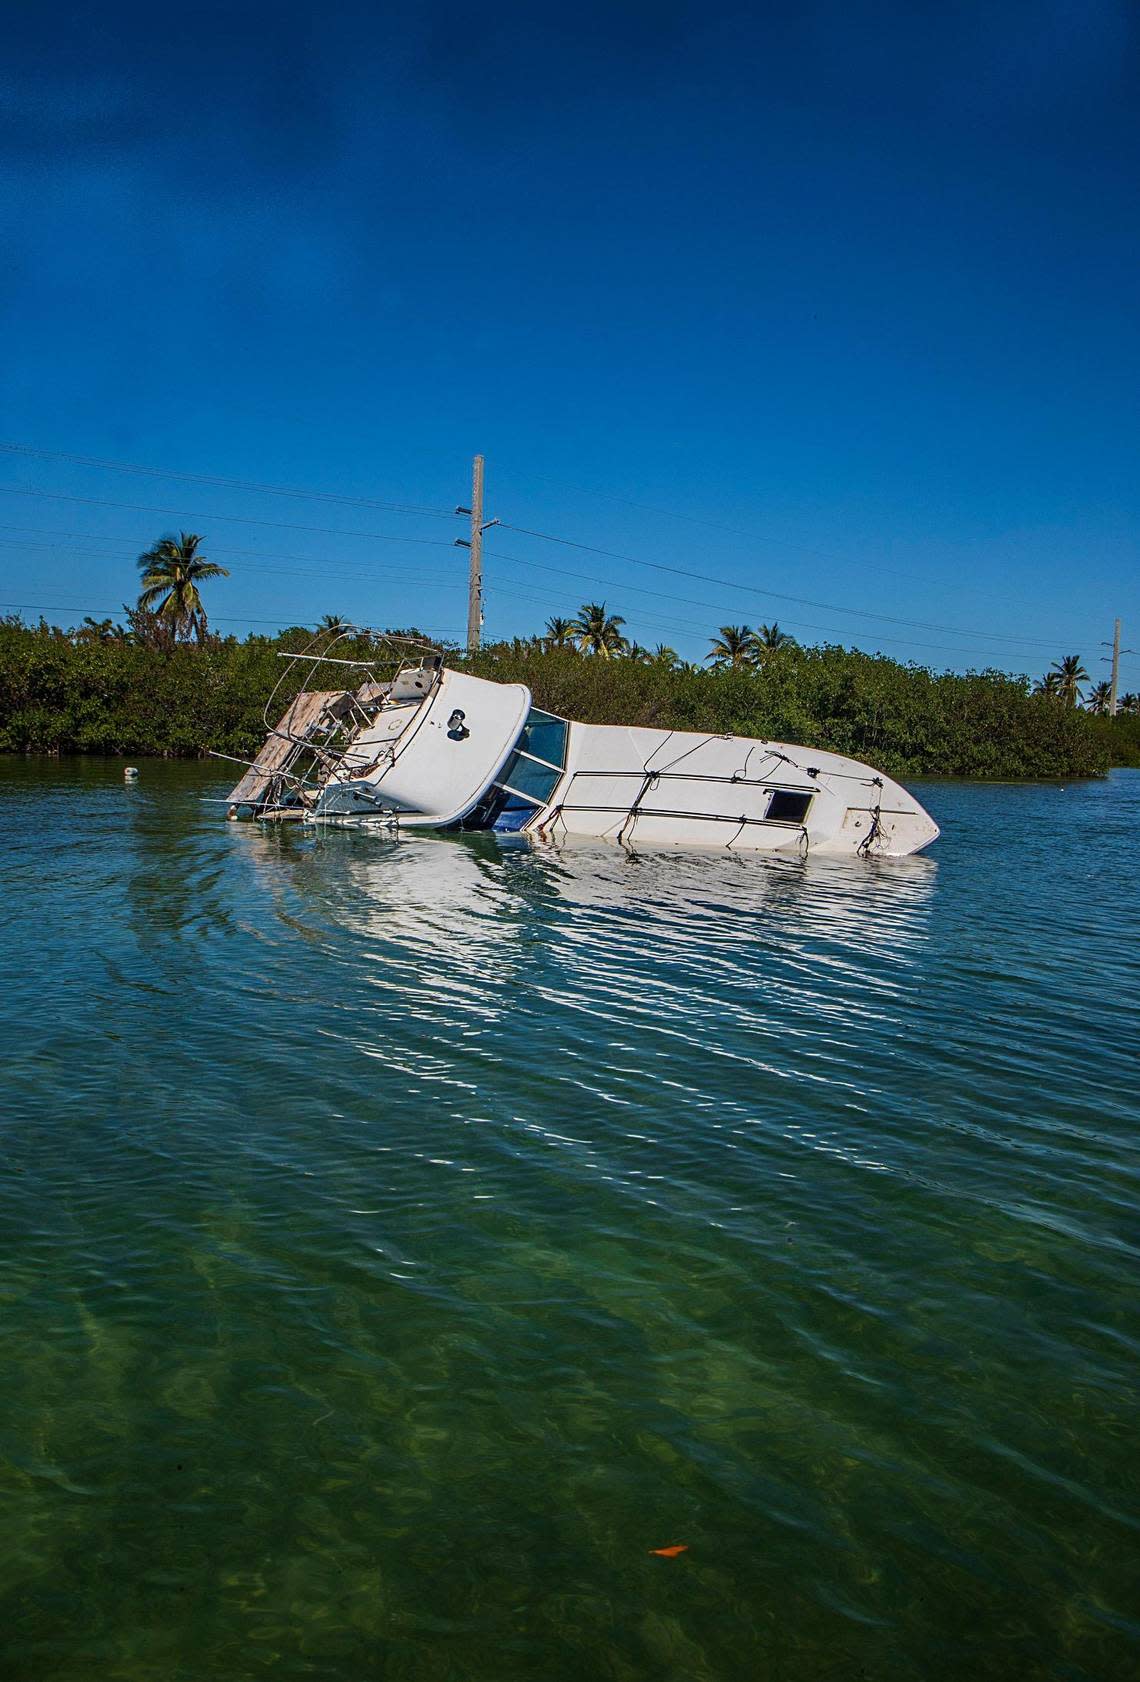 A boat lists on its side in shallow water off Sugarloaf Key Thursday, Oct. 27, 2022. The boat is one of more than 100 displaced vessels resulting from Hurricane Ian, which passed by the Florida Keys on Sept. 27, 2022.